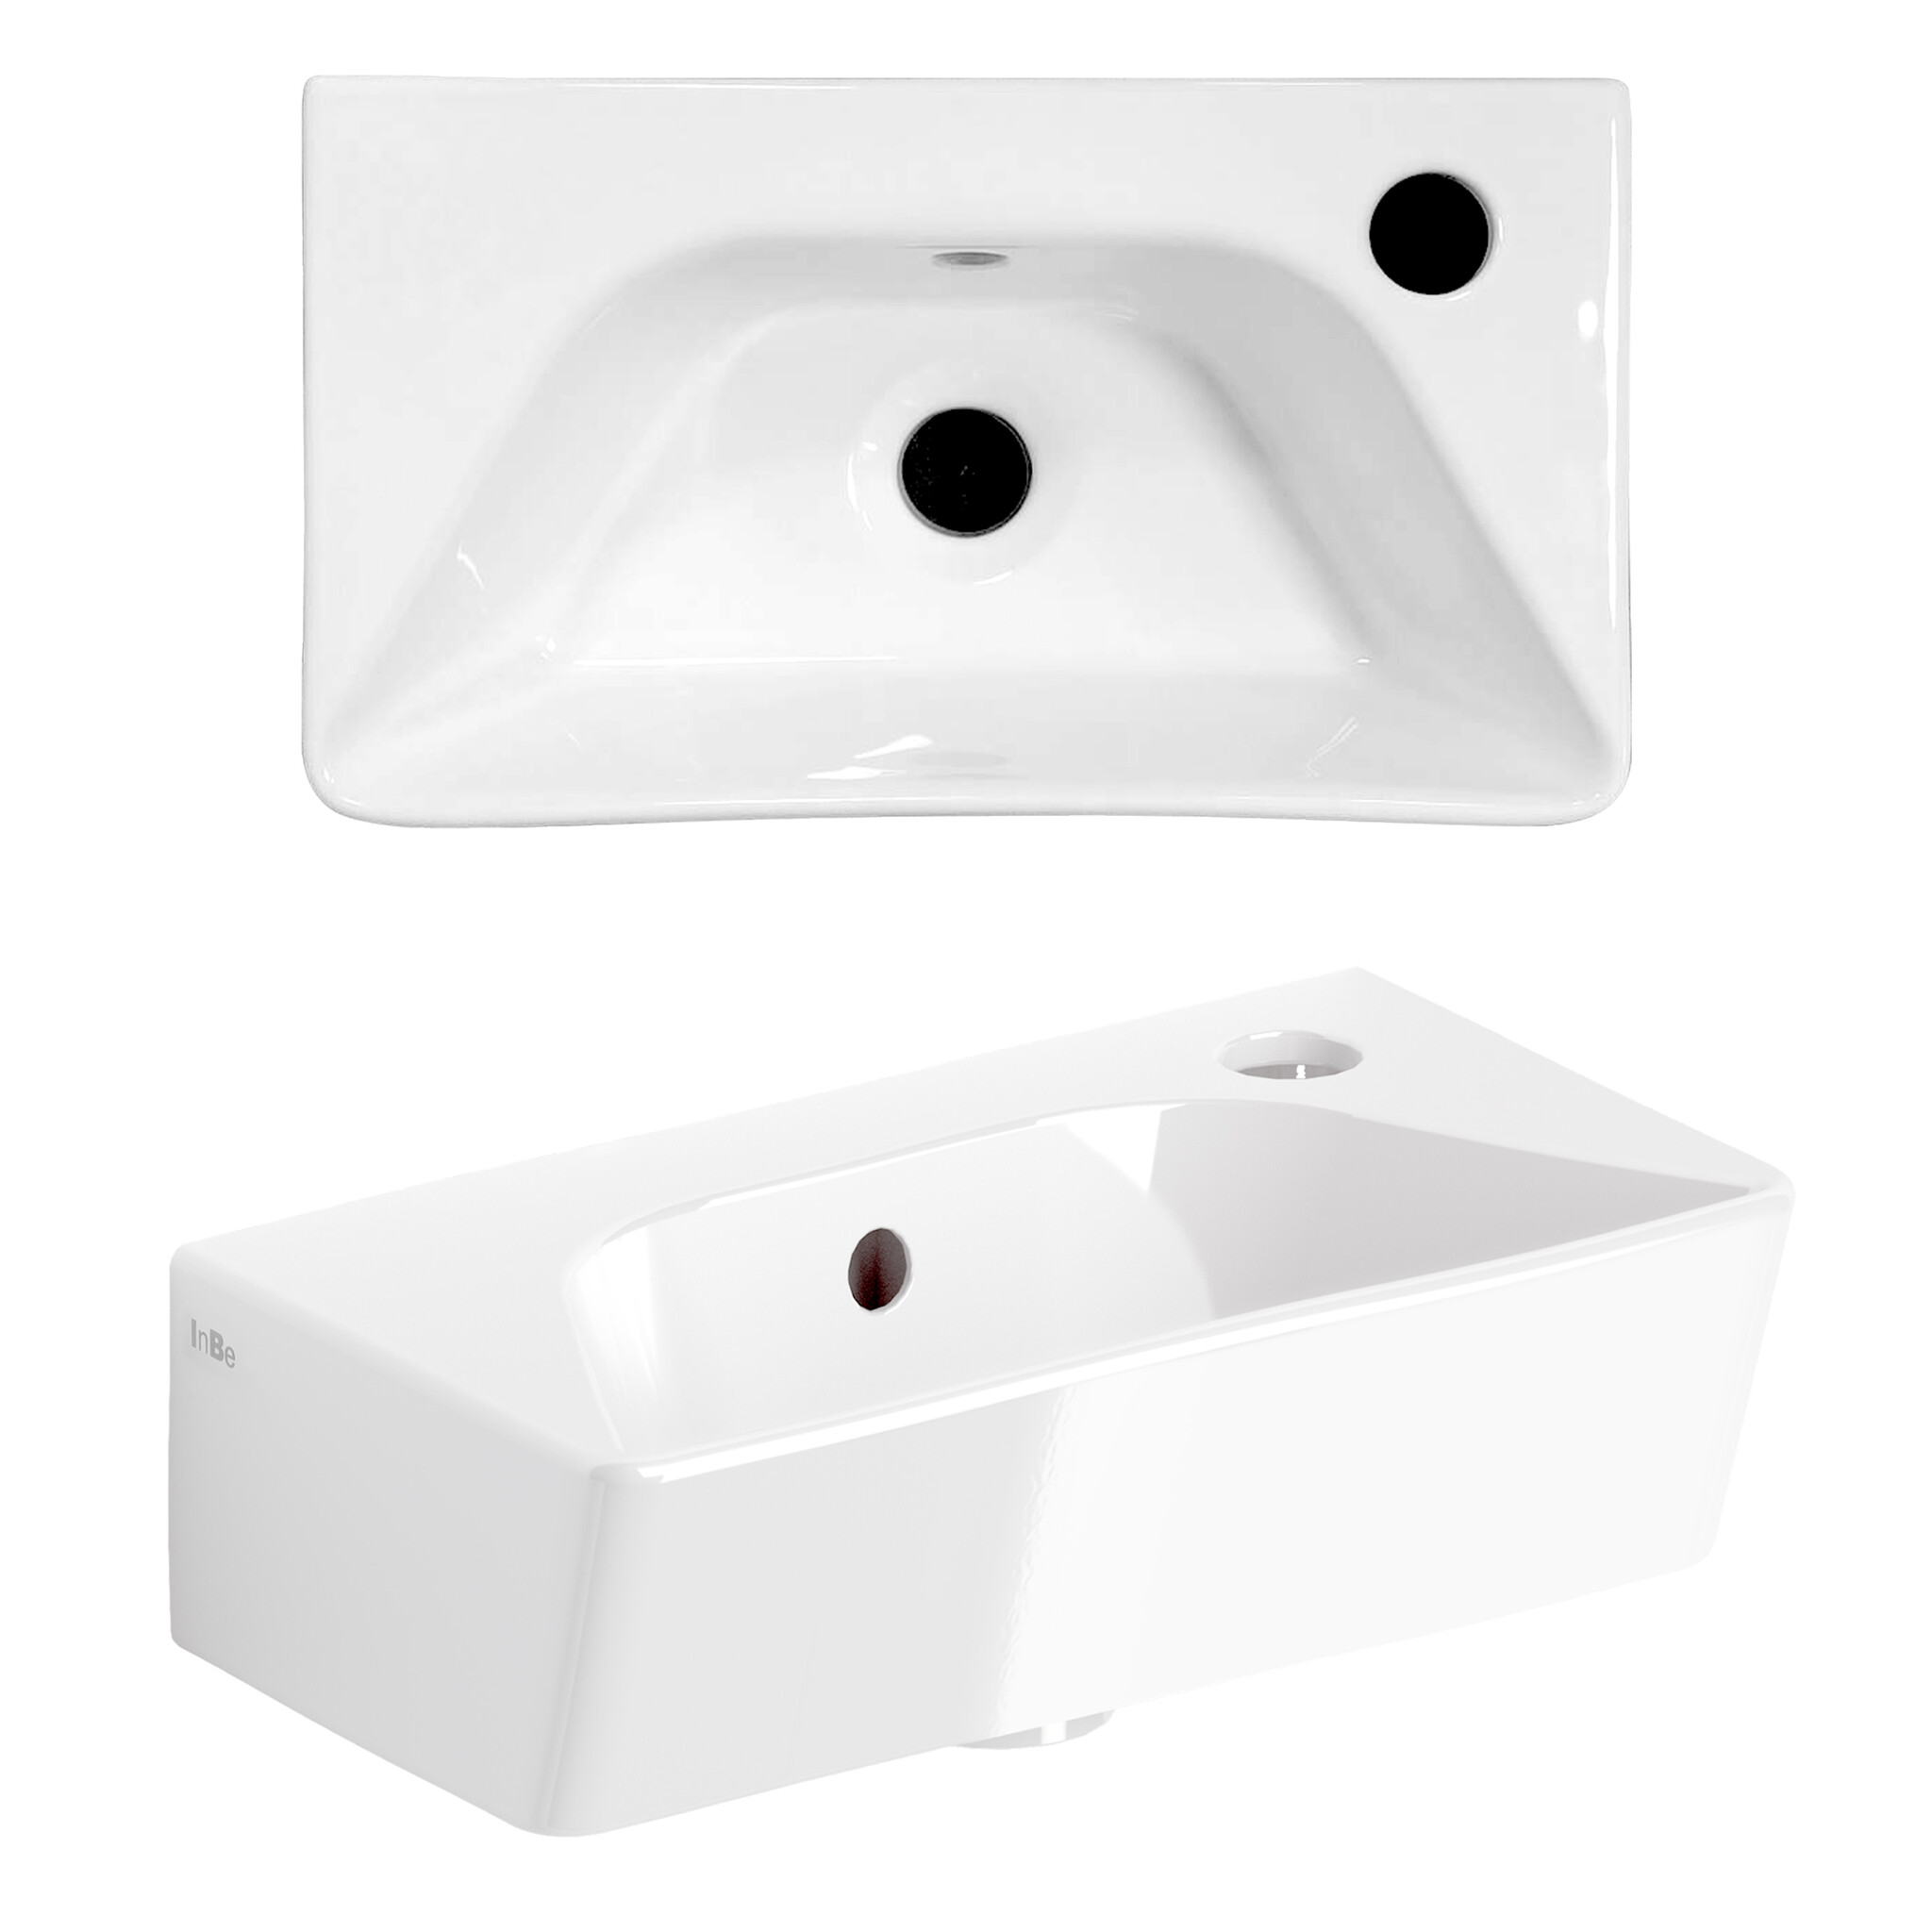 InBe InBe 6 handbasin, with taphole, without drain, white ceramic